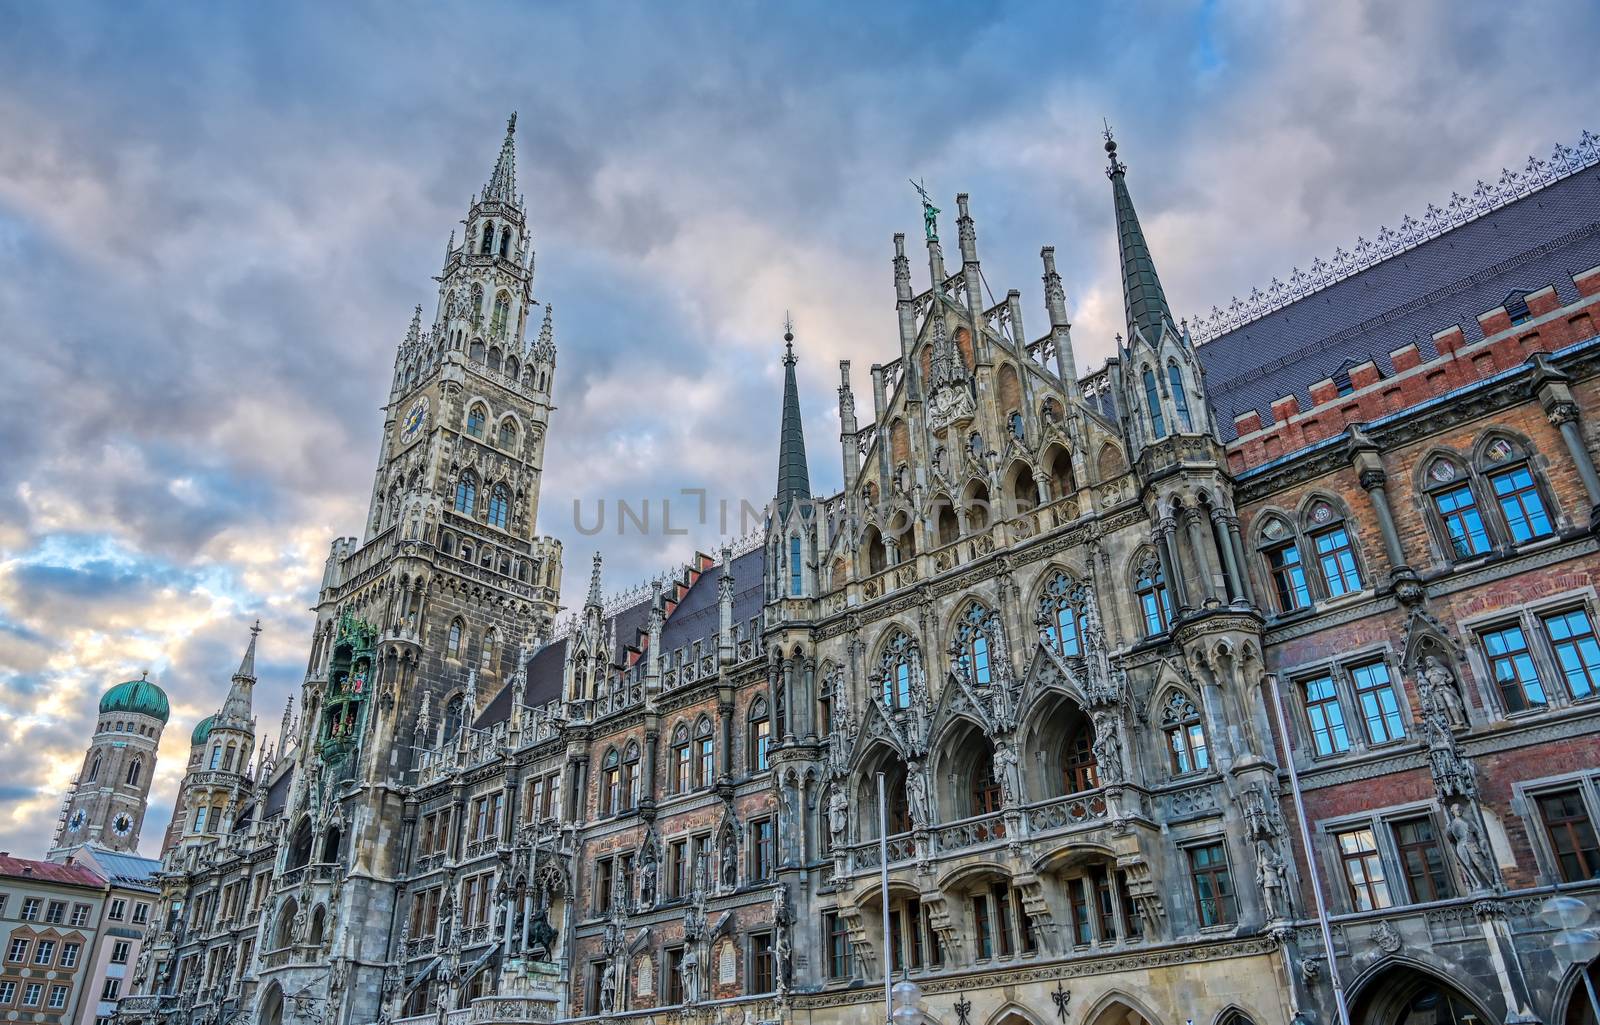 The New Town Hall in Munich, Germany by jbyard22